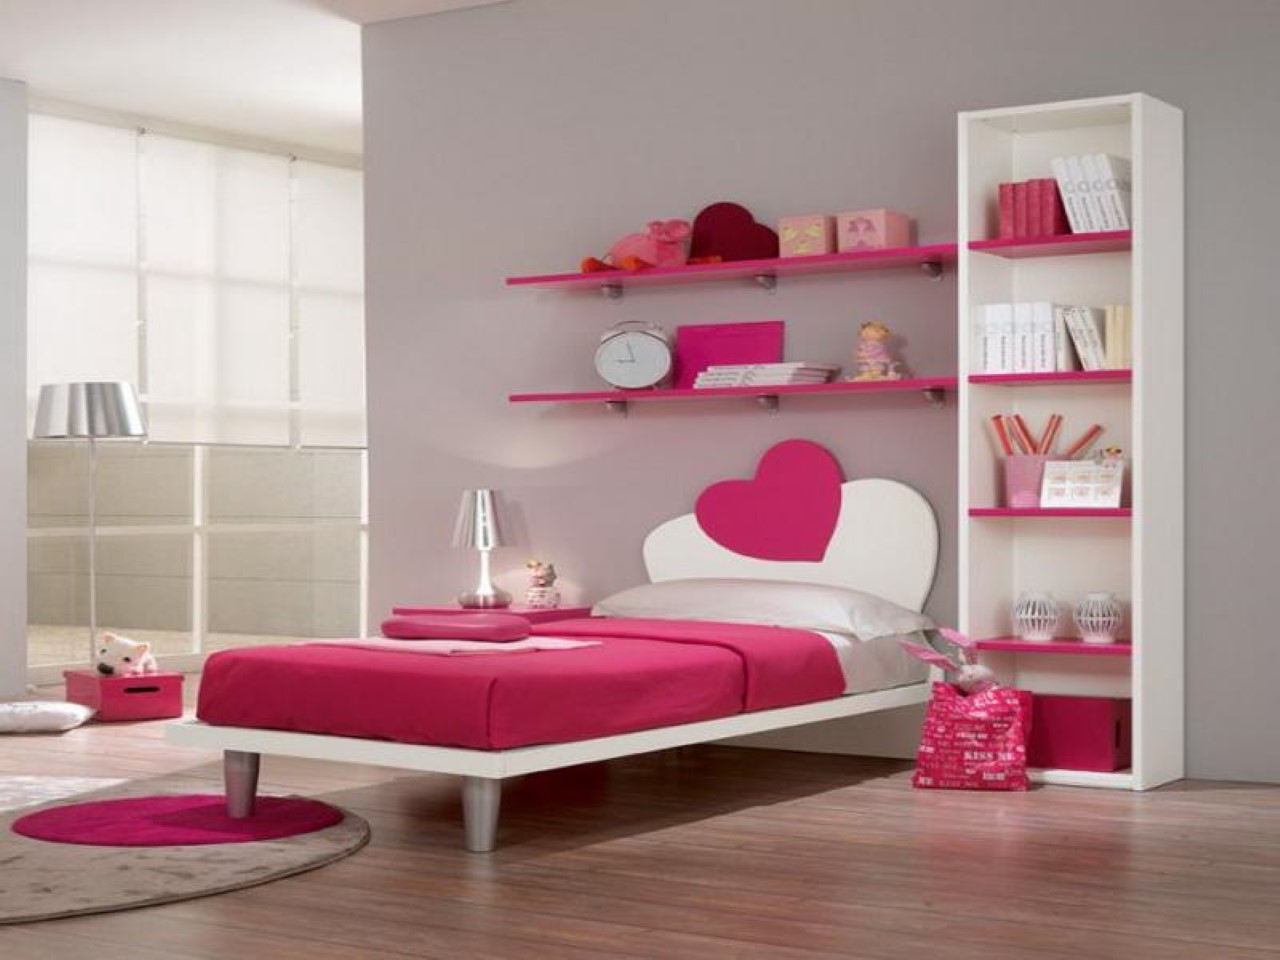 Wall Shelf Heart Cool Wall Shelf Design Also Heart Shaped Headboard In Exclusive Girl Bedroom Idea Feat Oversized Window Bedroom Chic Minimalist Girl Bedrooms That Blend Impressive With Practicality